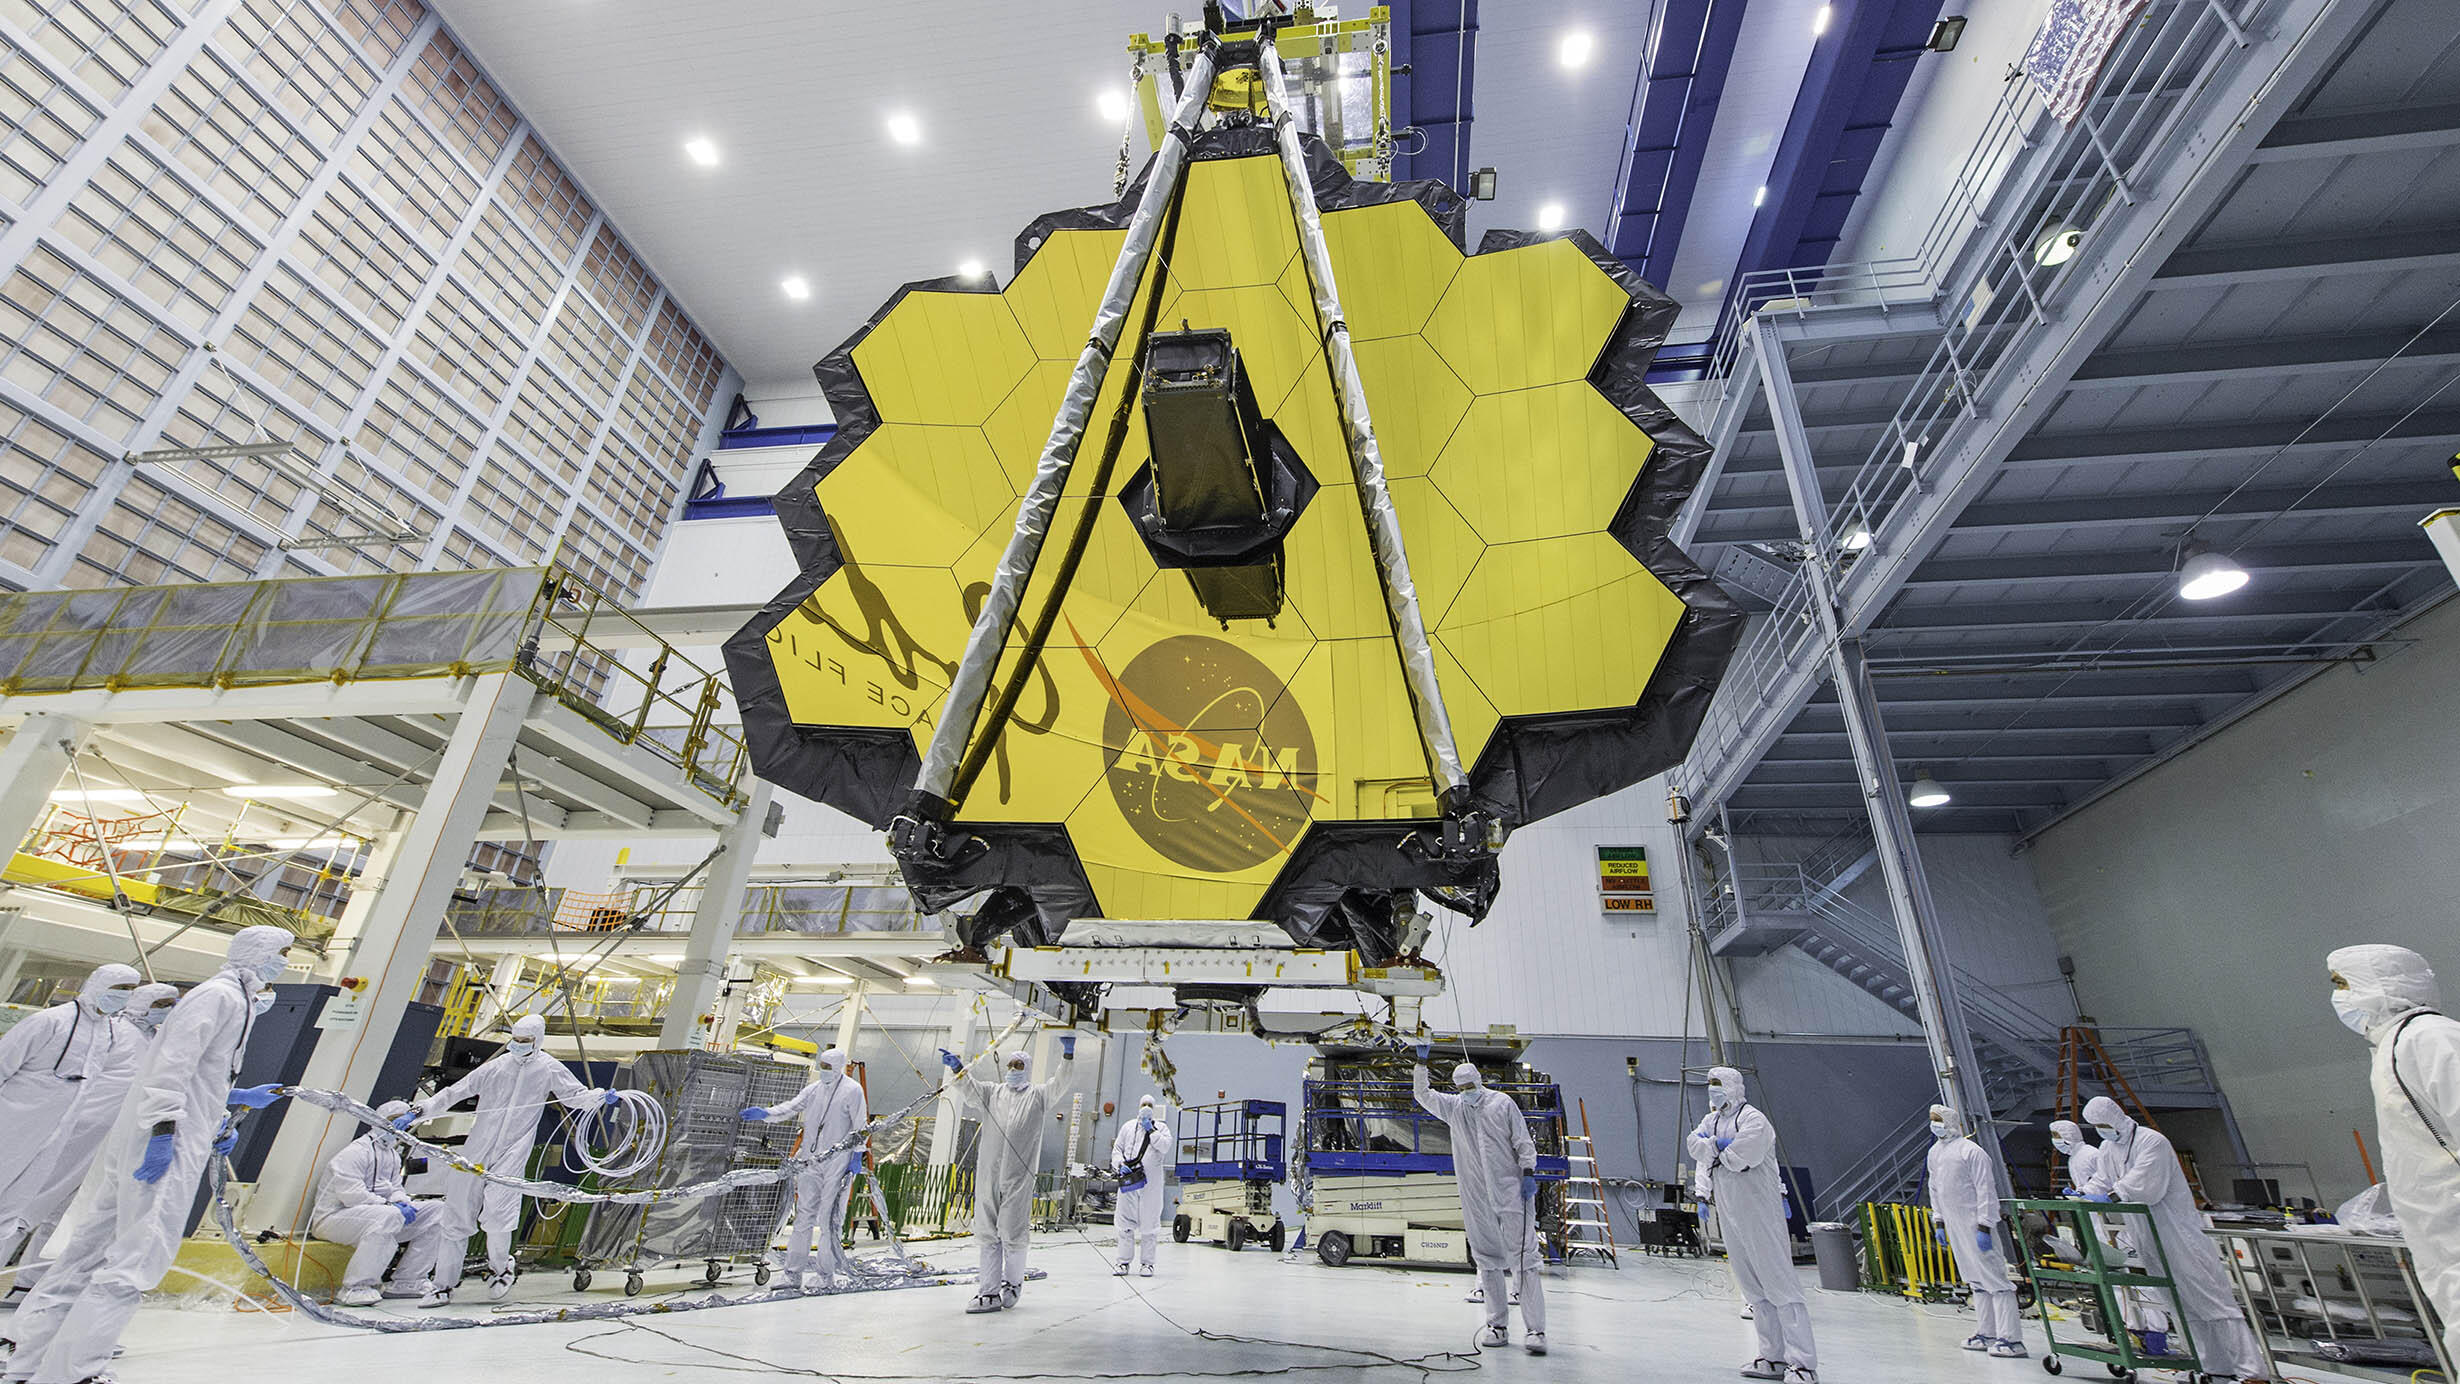 Fourteen technicians wearing cleanroom suits stand beneath the James Webb Space Telescope.